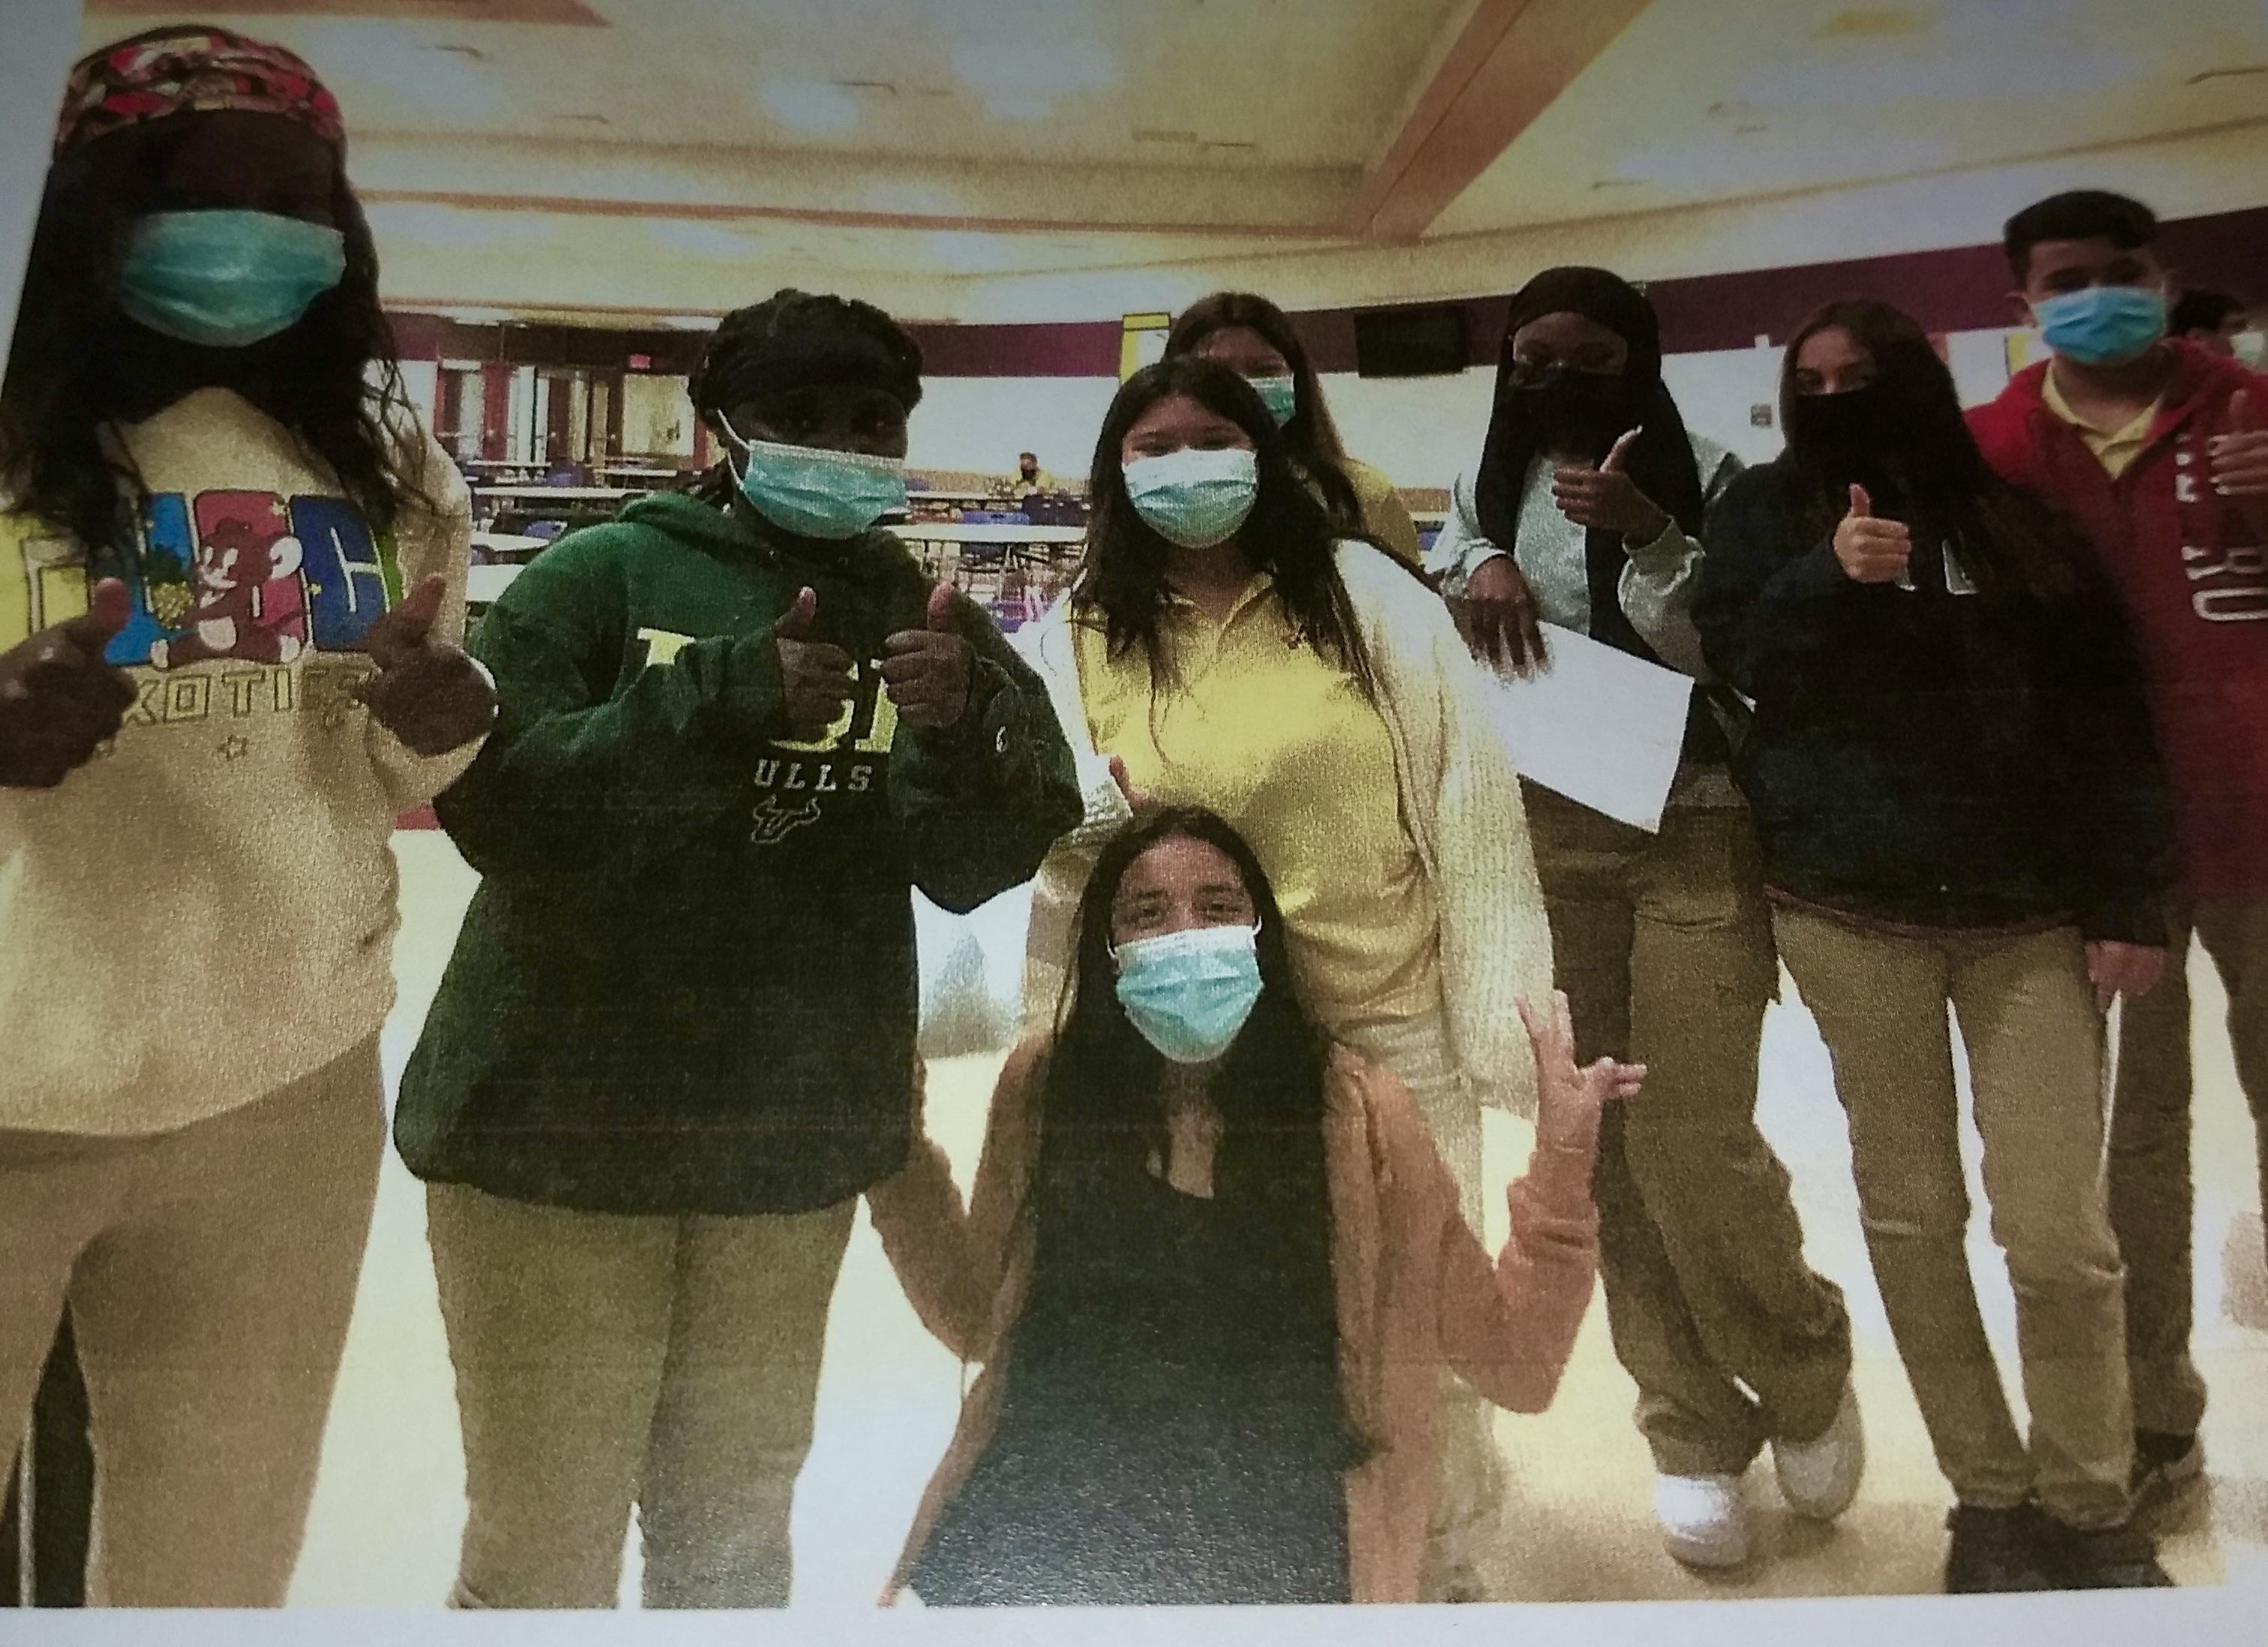 High school students wearing masks pose for a photo with their thumbs up